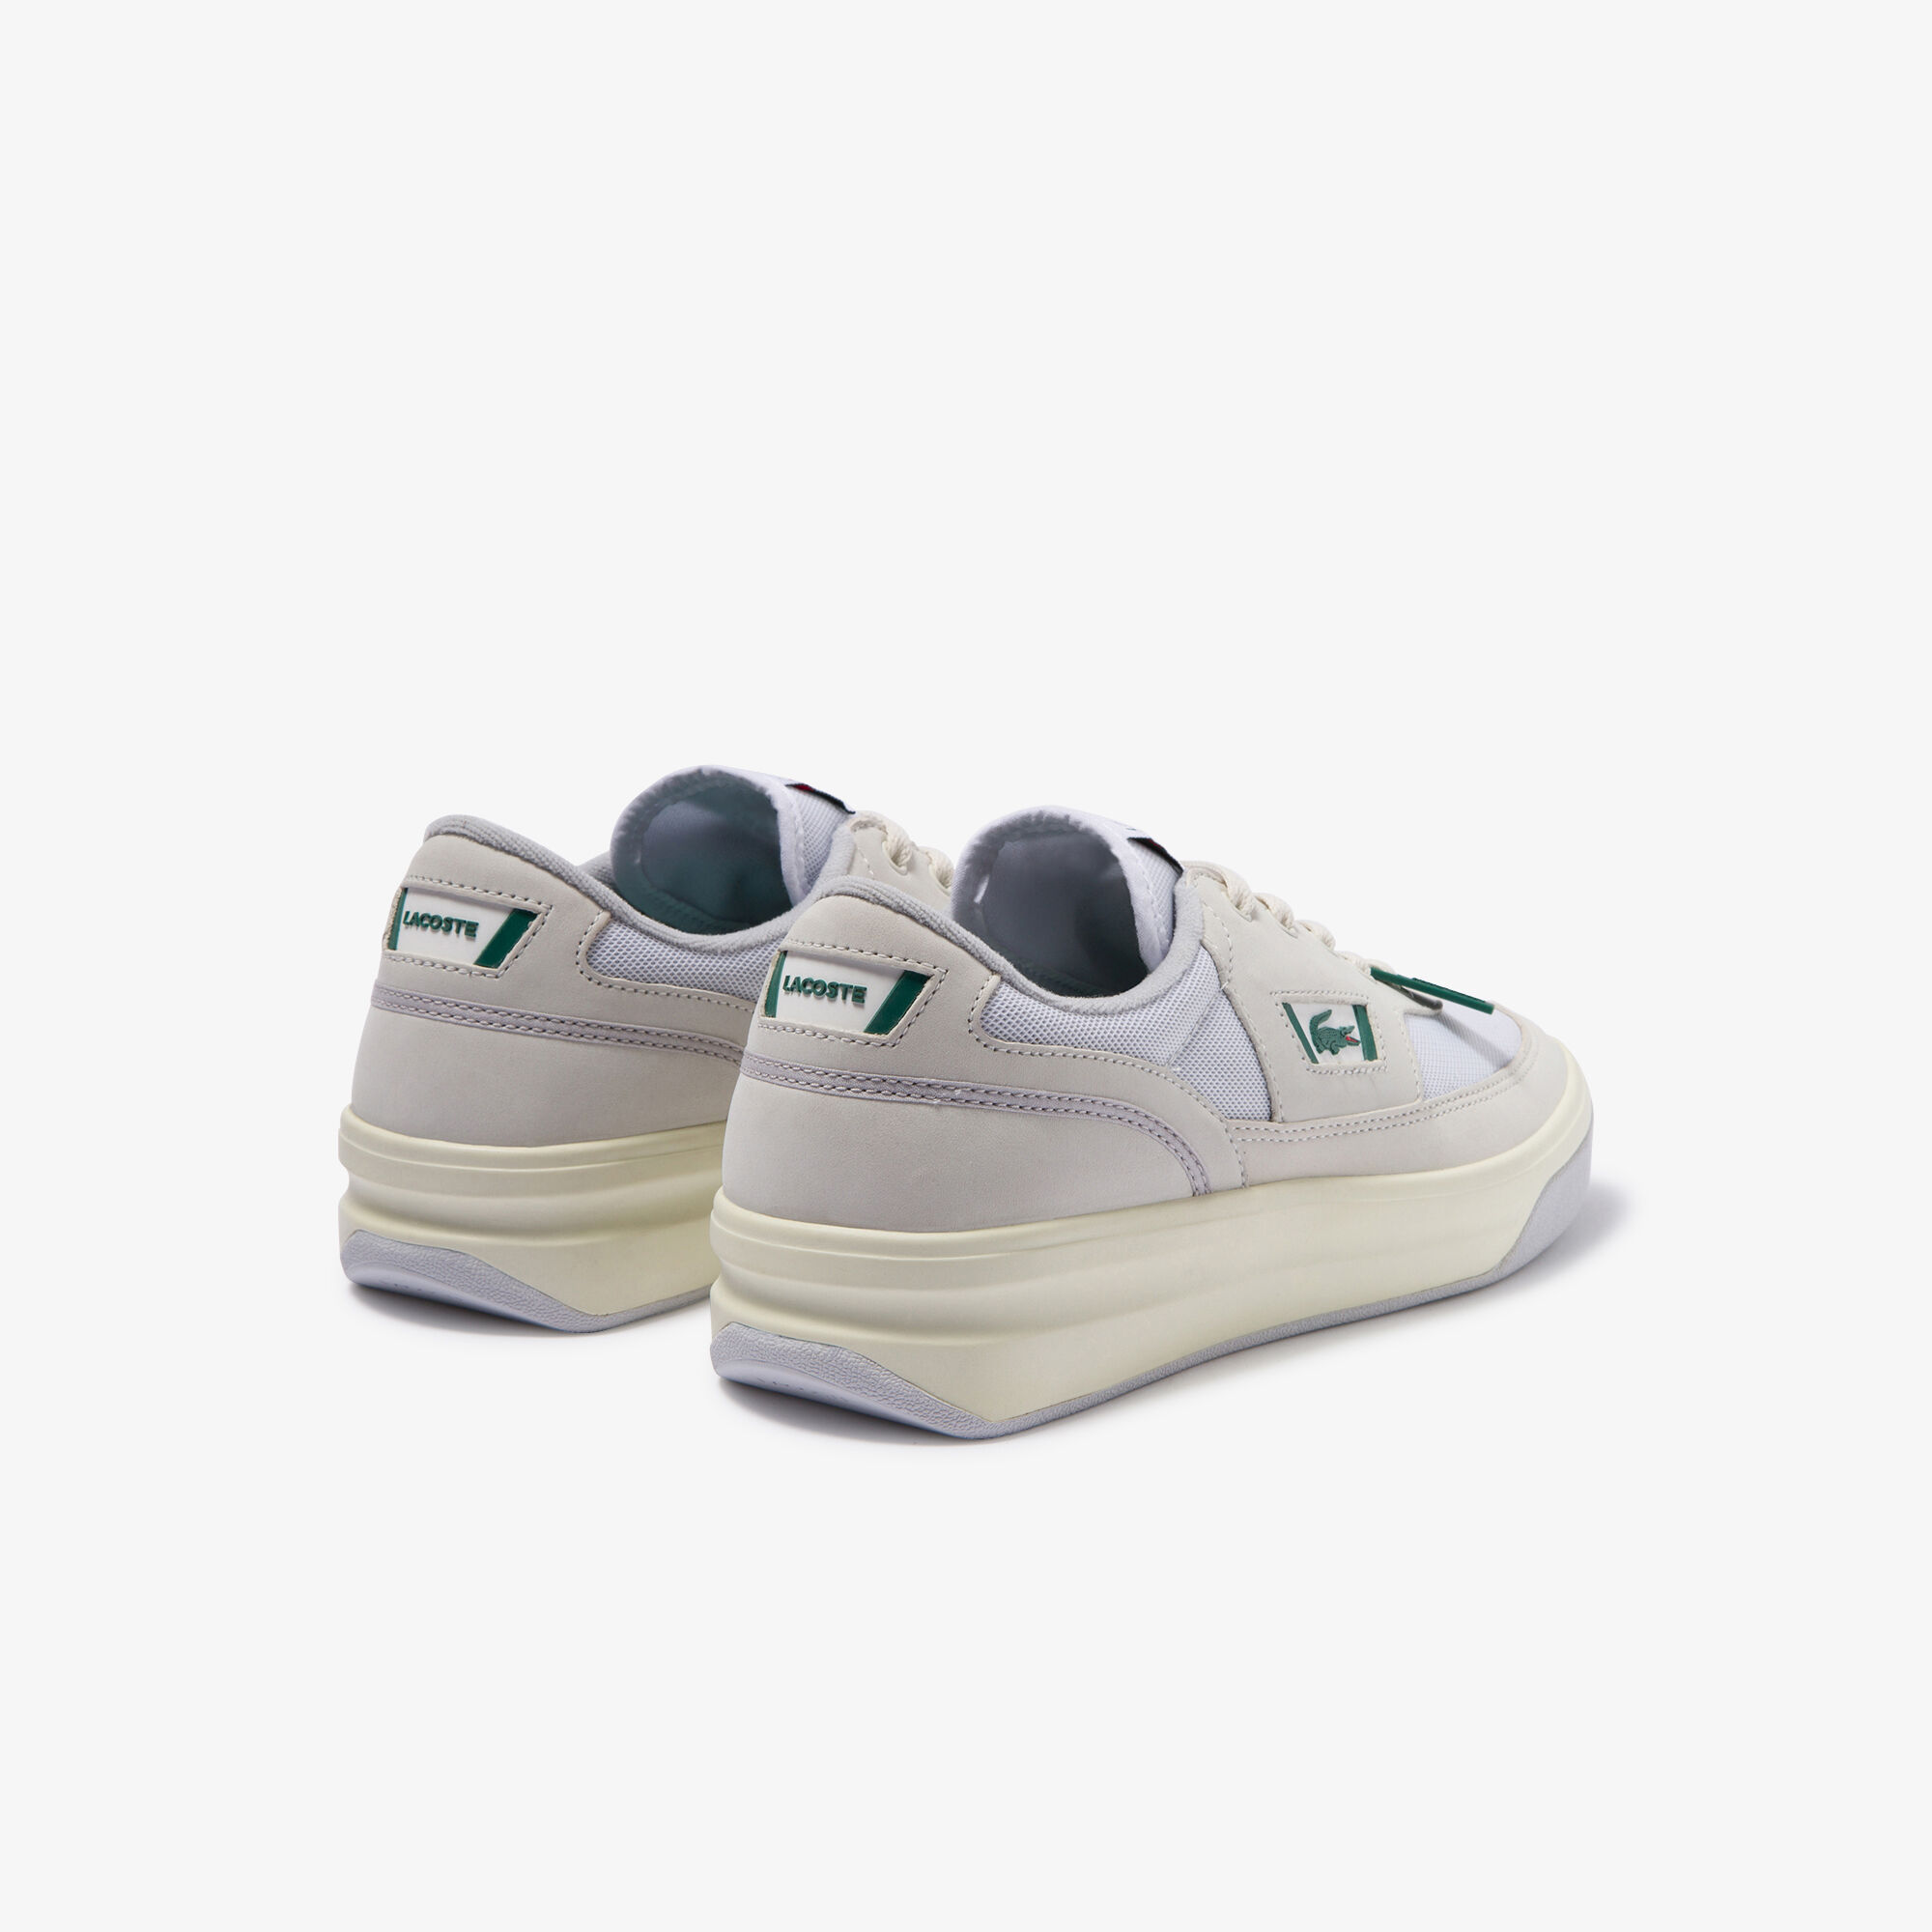 Men's G80 OG Leather and Textile Trainers